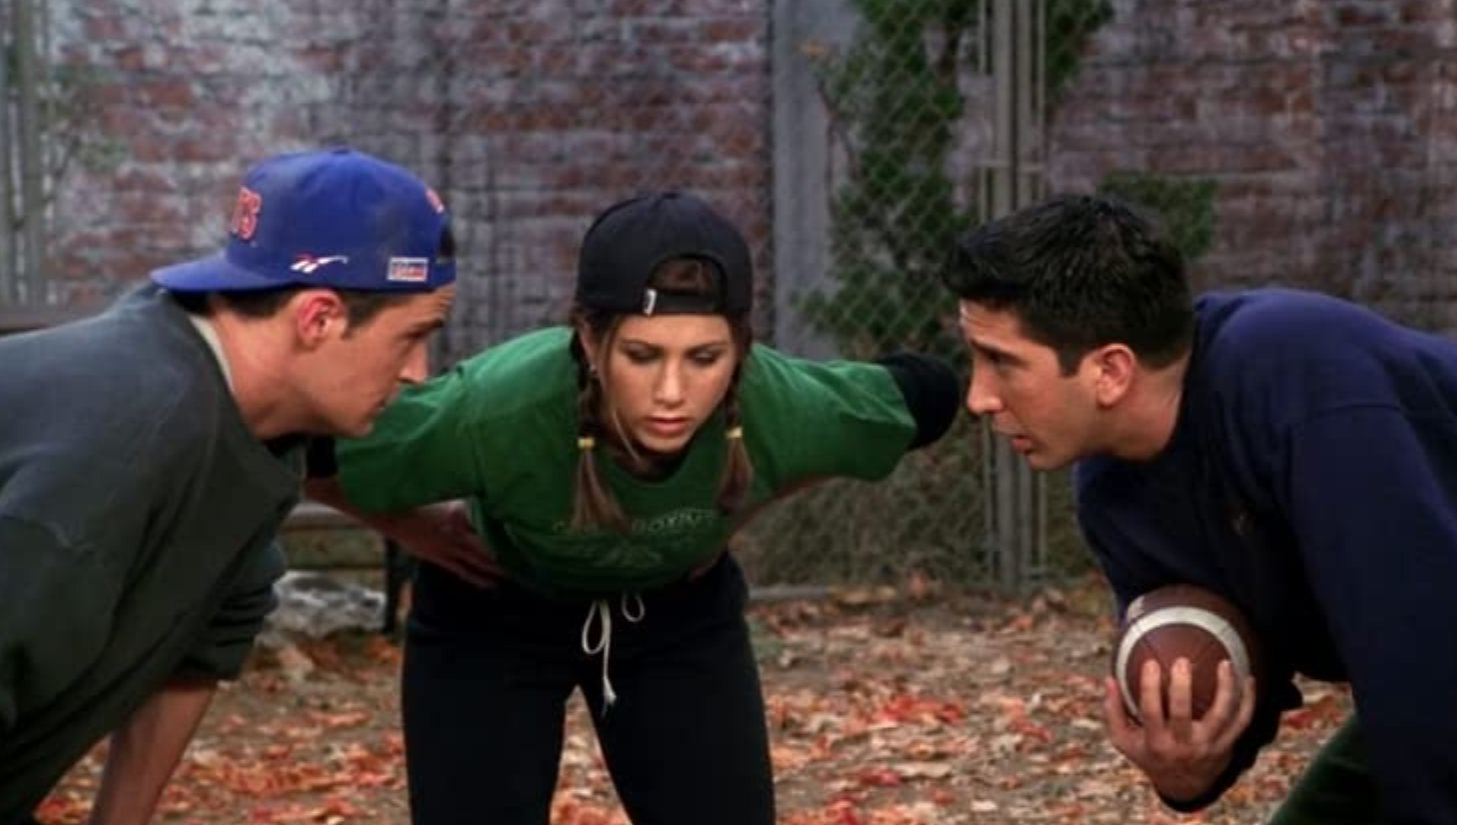 Chandler, Rachel, and Ross huddle together to go over their football game plan.